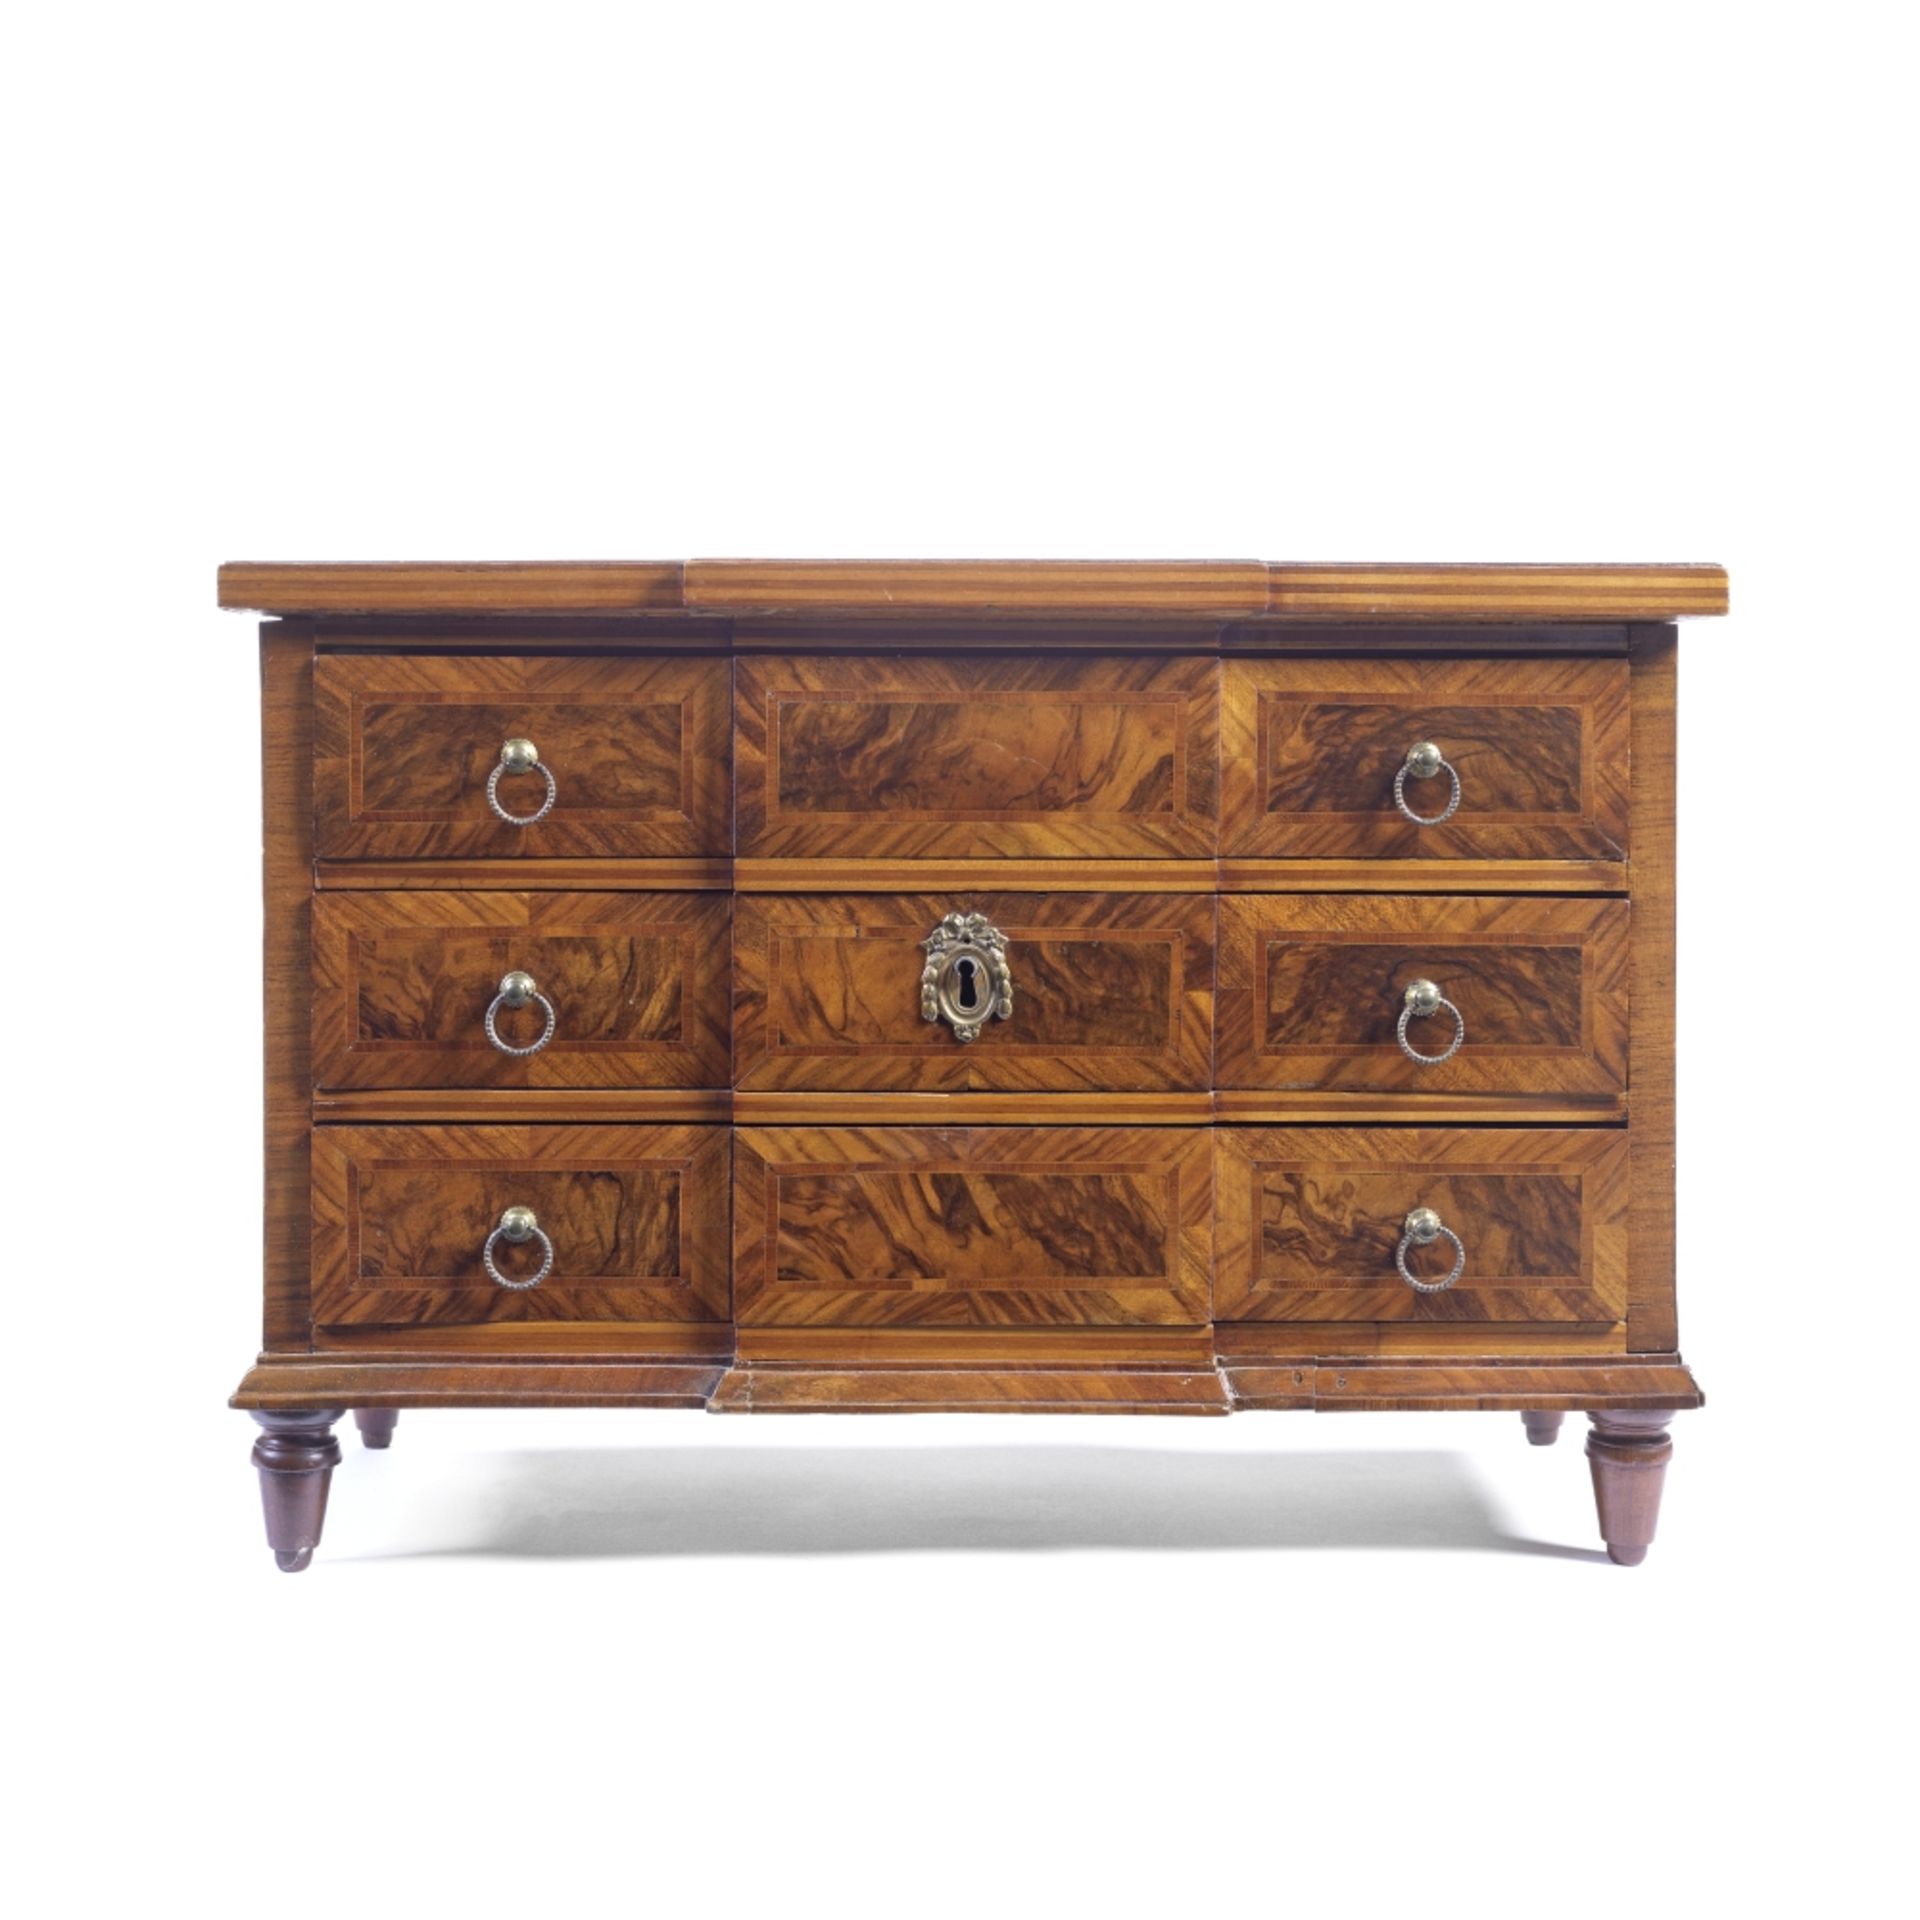 An early 19th century South German walnut miniature chest